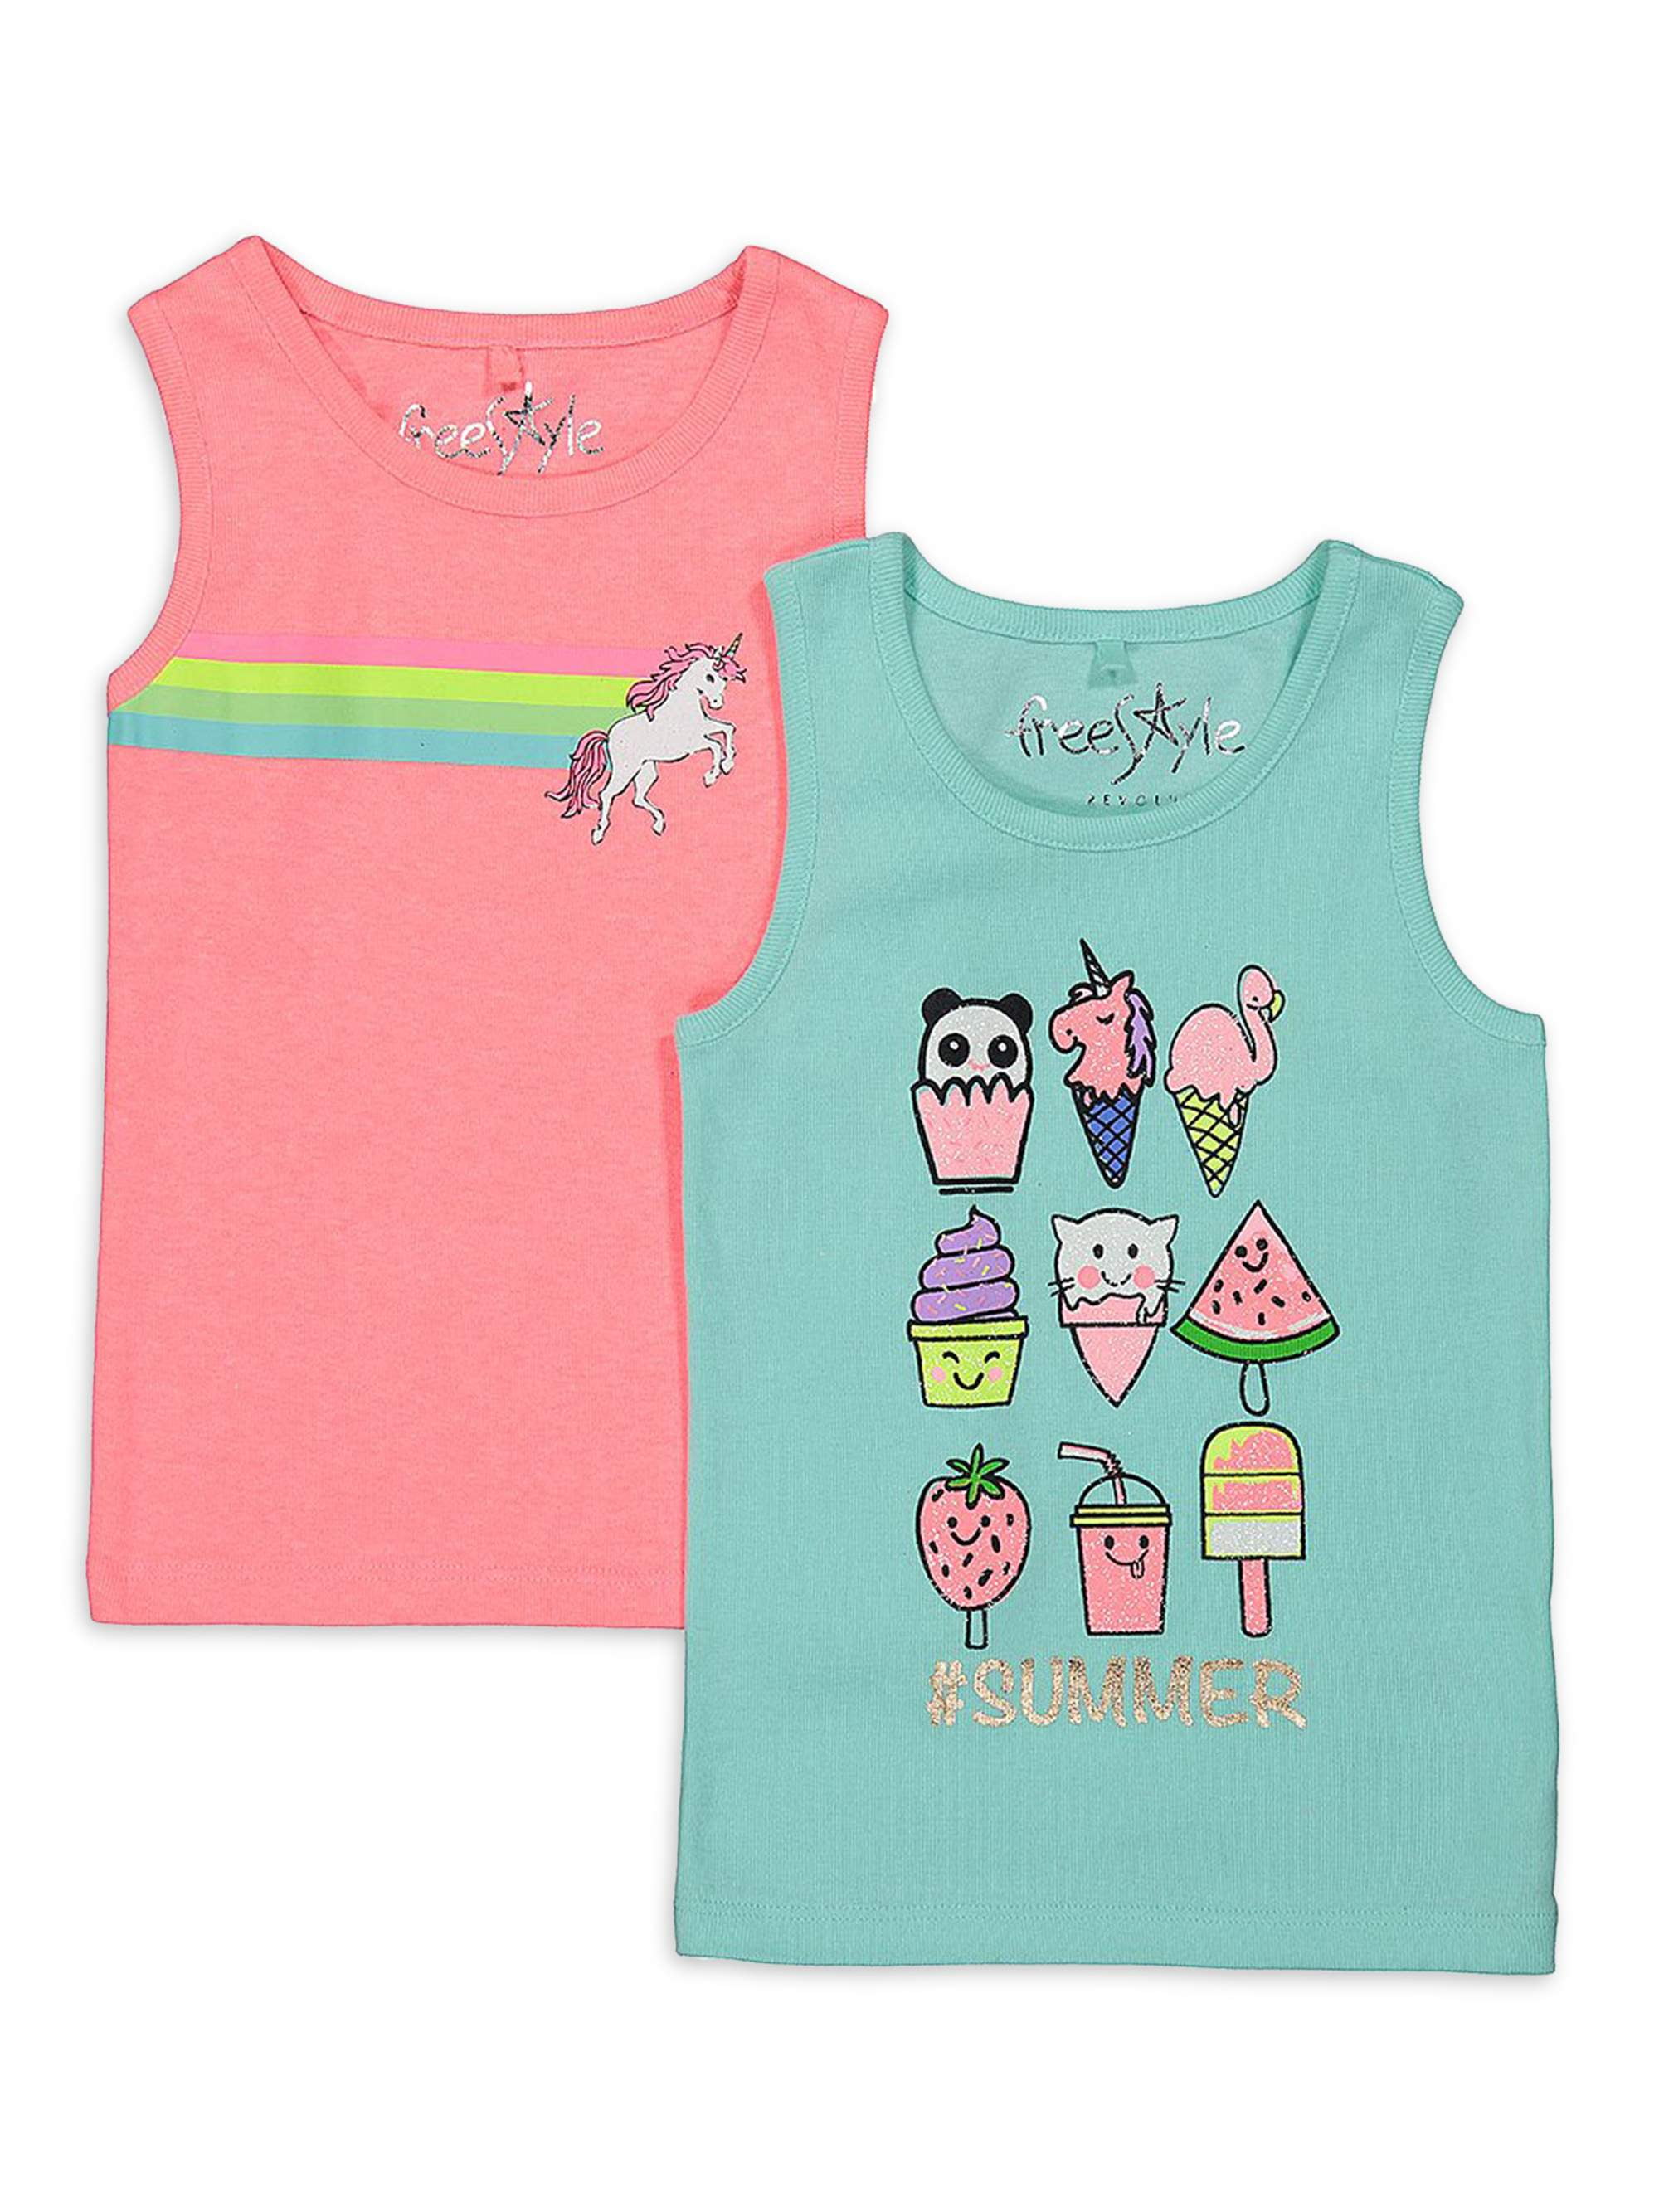 Freestyle Revolution Girls Graphic Tank Tops, 2-Pack, Sizes 4-12 ...